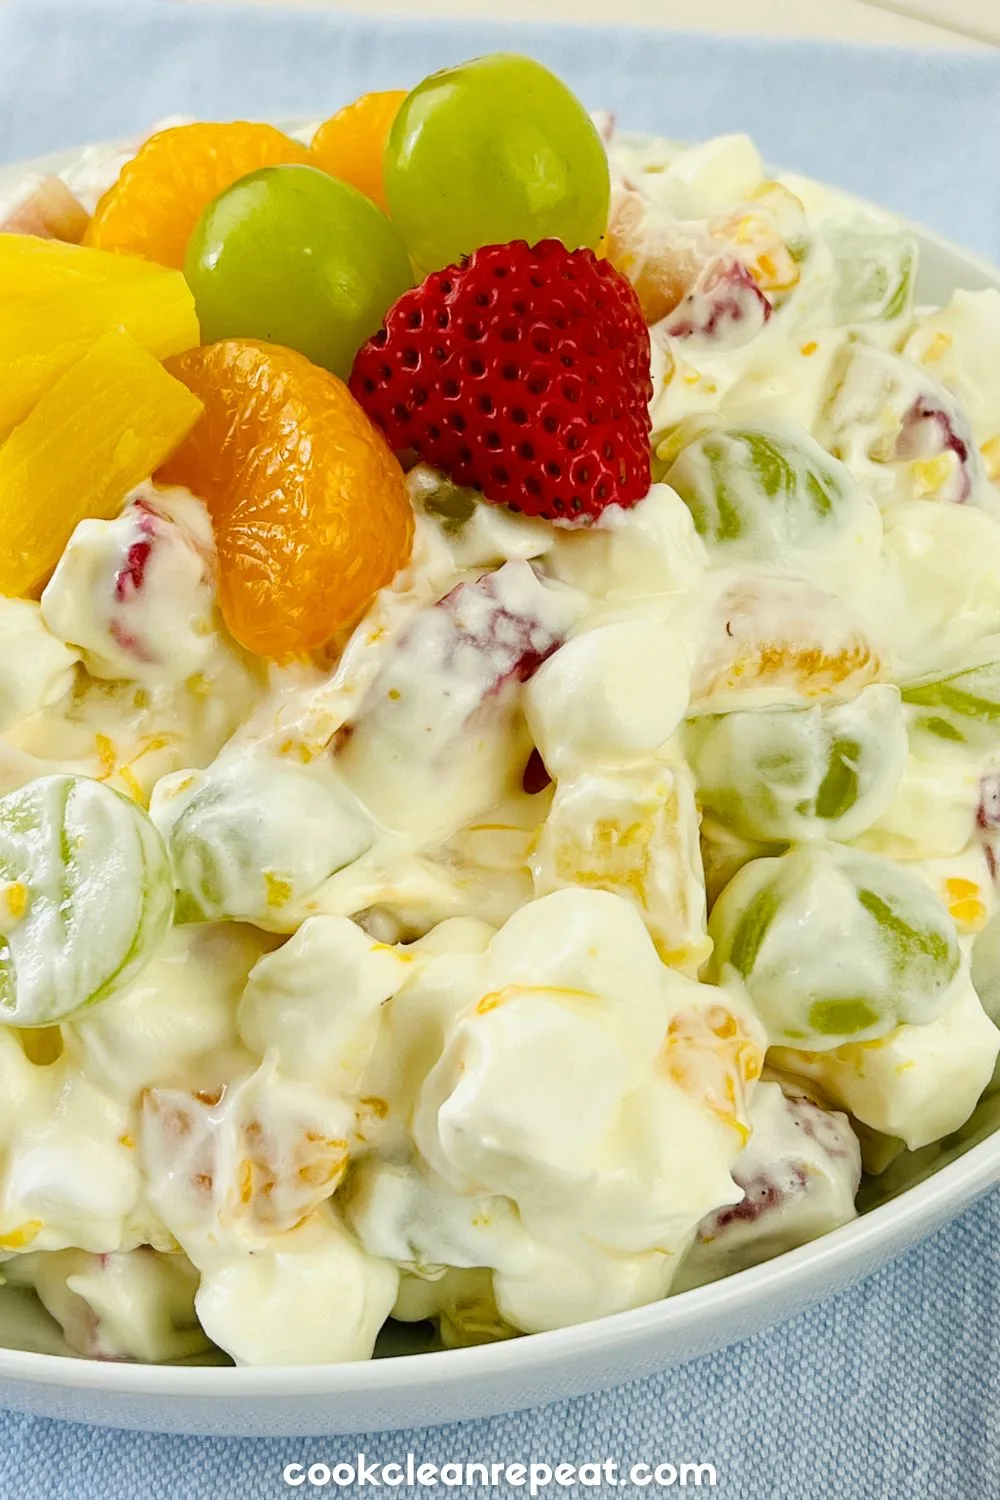 Fruit Salad with Pudding topped with fresh strawberries, pineapple, mandarin, and grapes